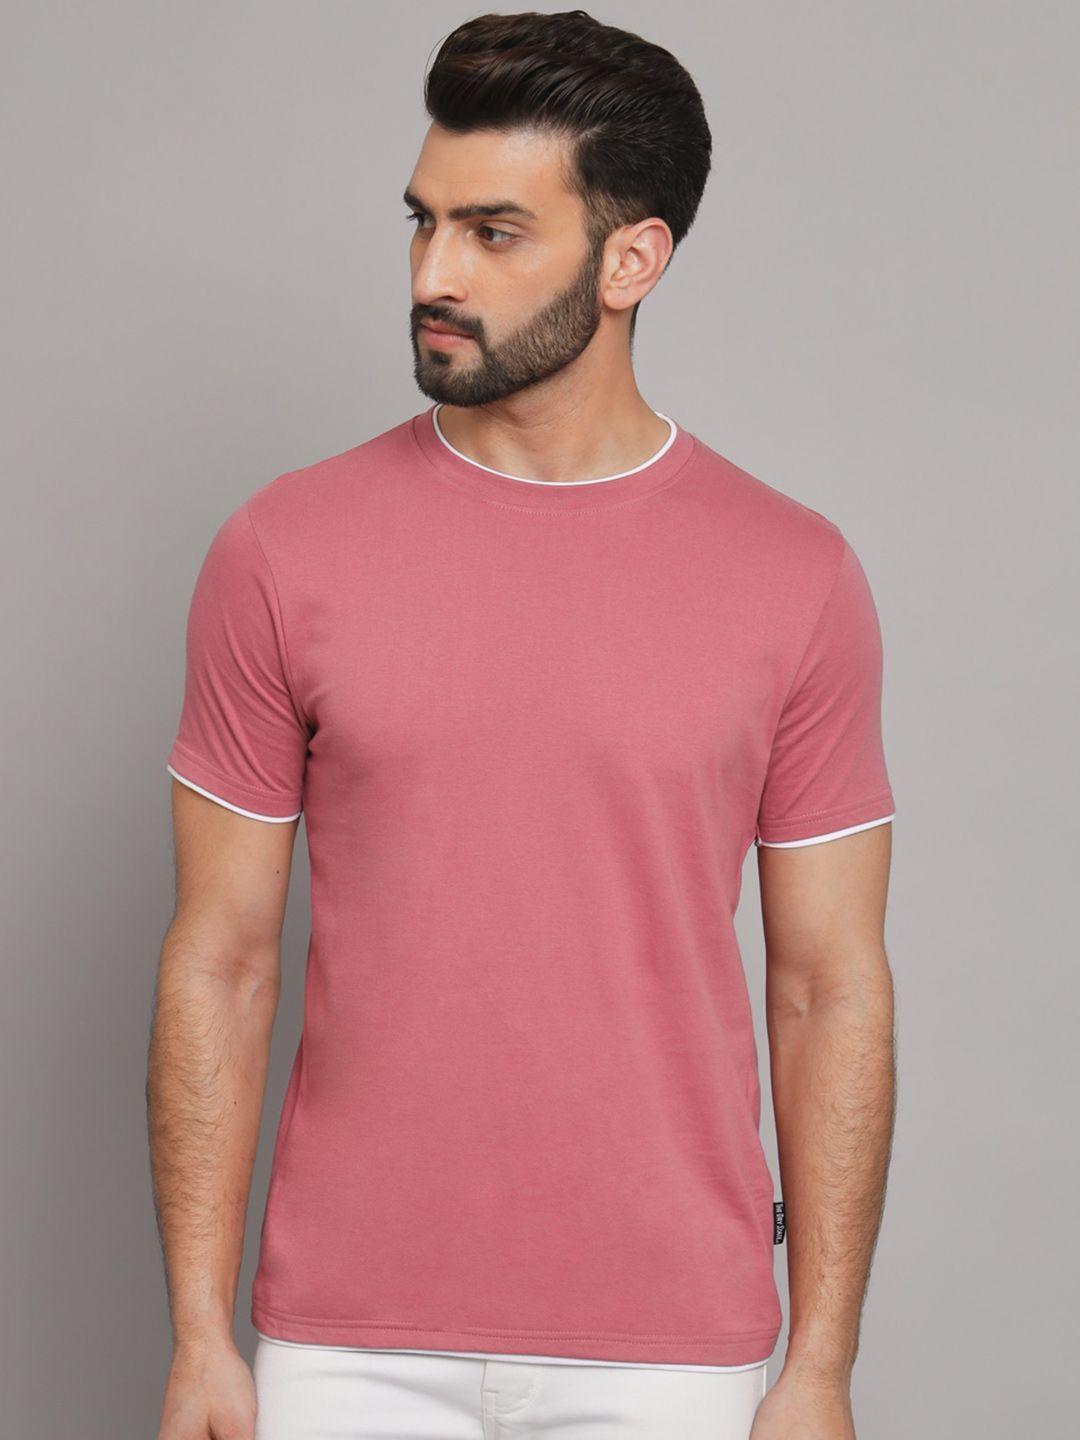 the dry state round neck cotton casual t-shirt